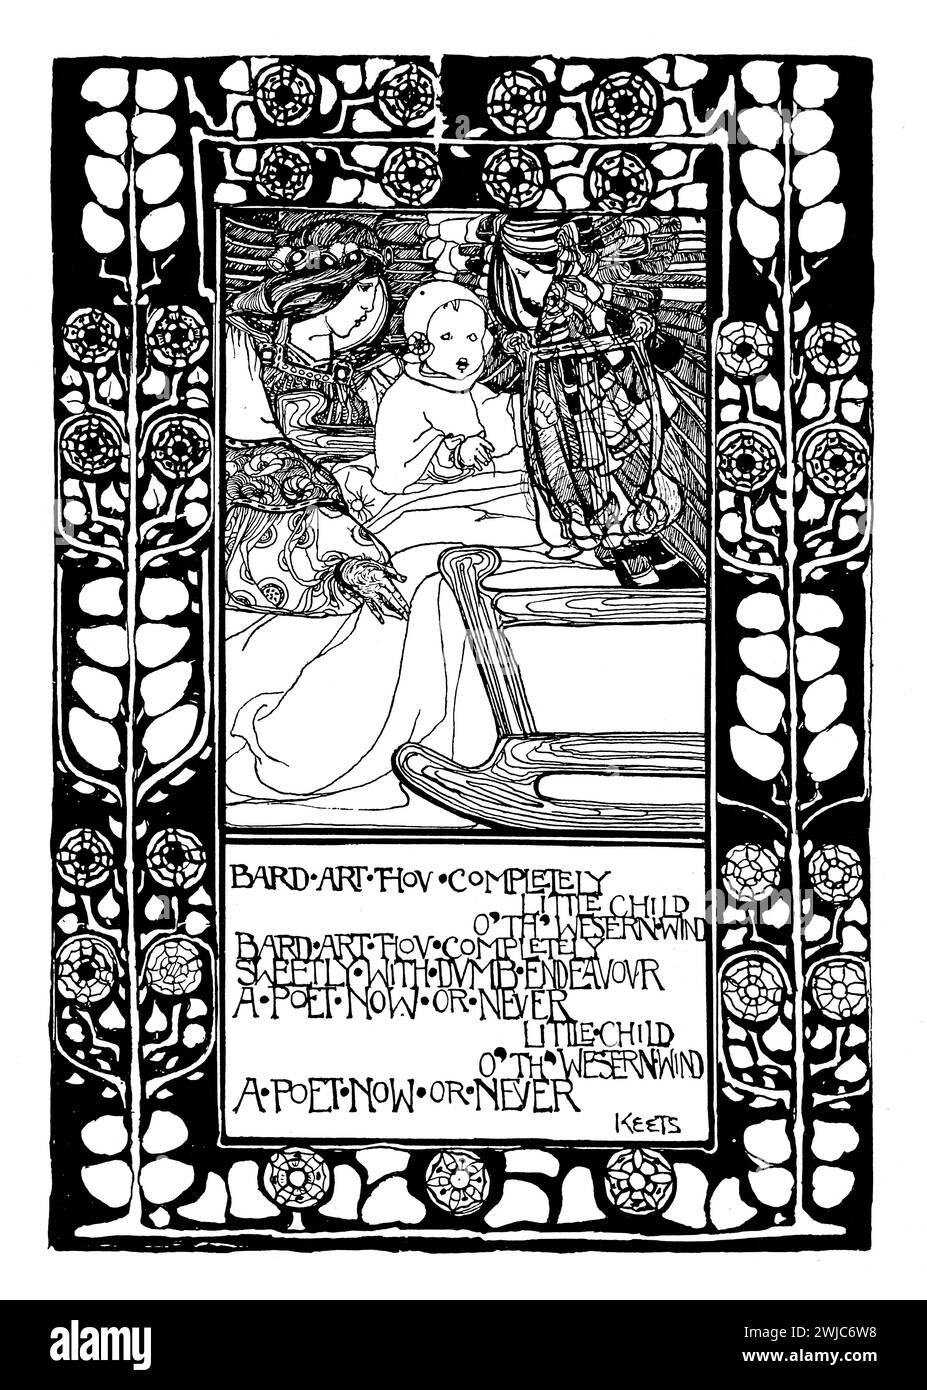 1901 Tis the Witching Time of Night Poem, von John Keats Line Illustration by Zufall Stockfoto